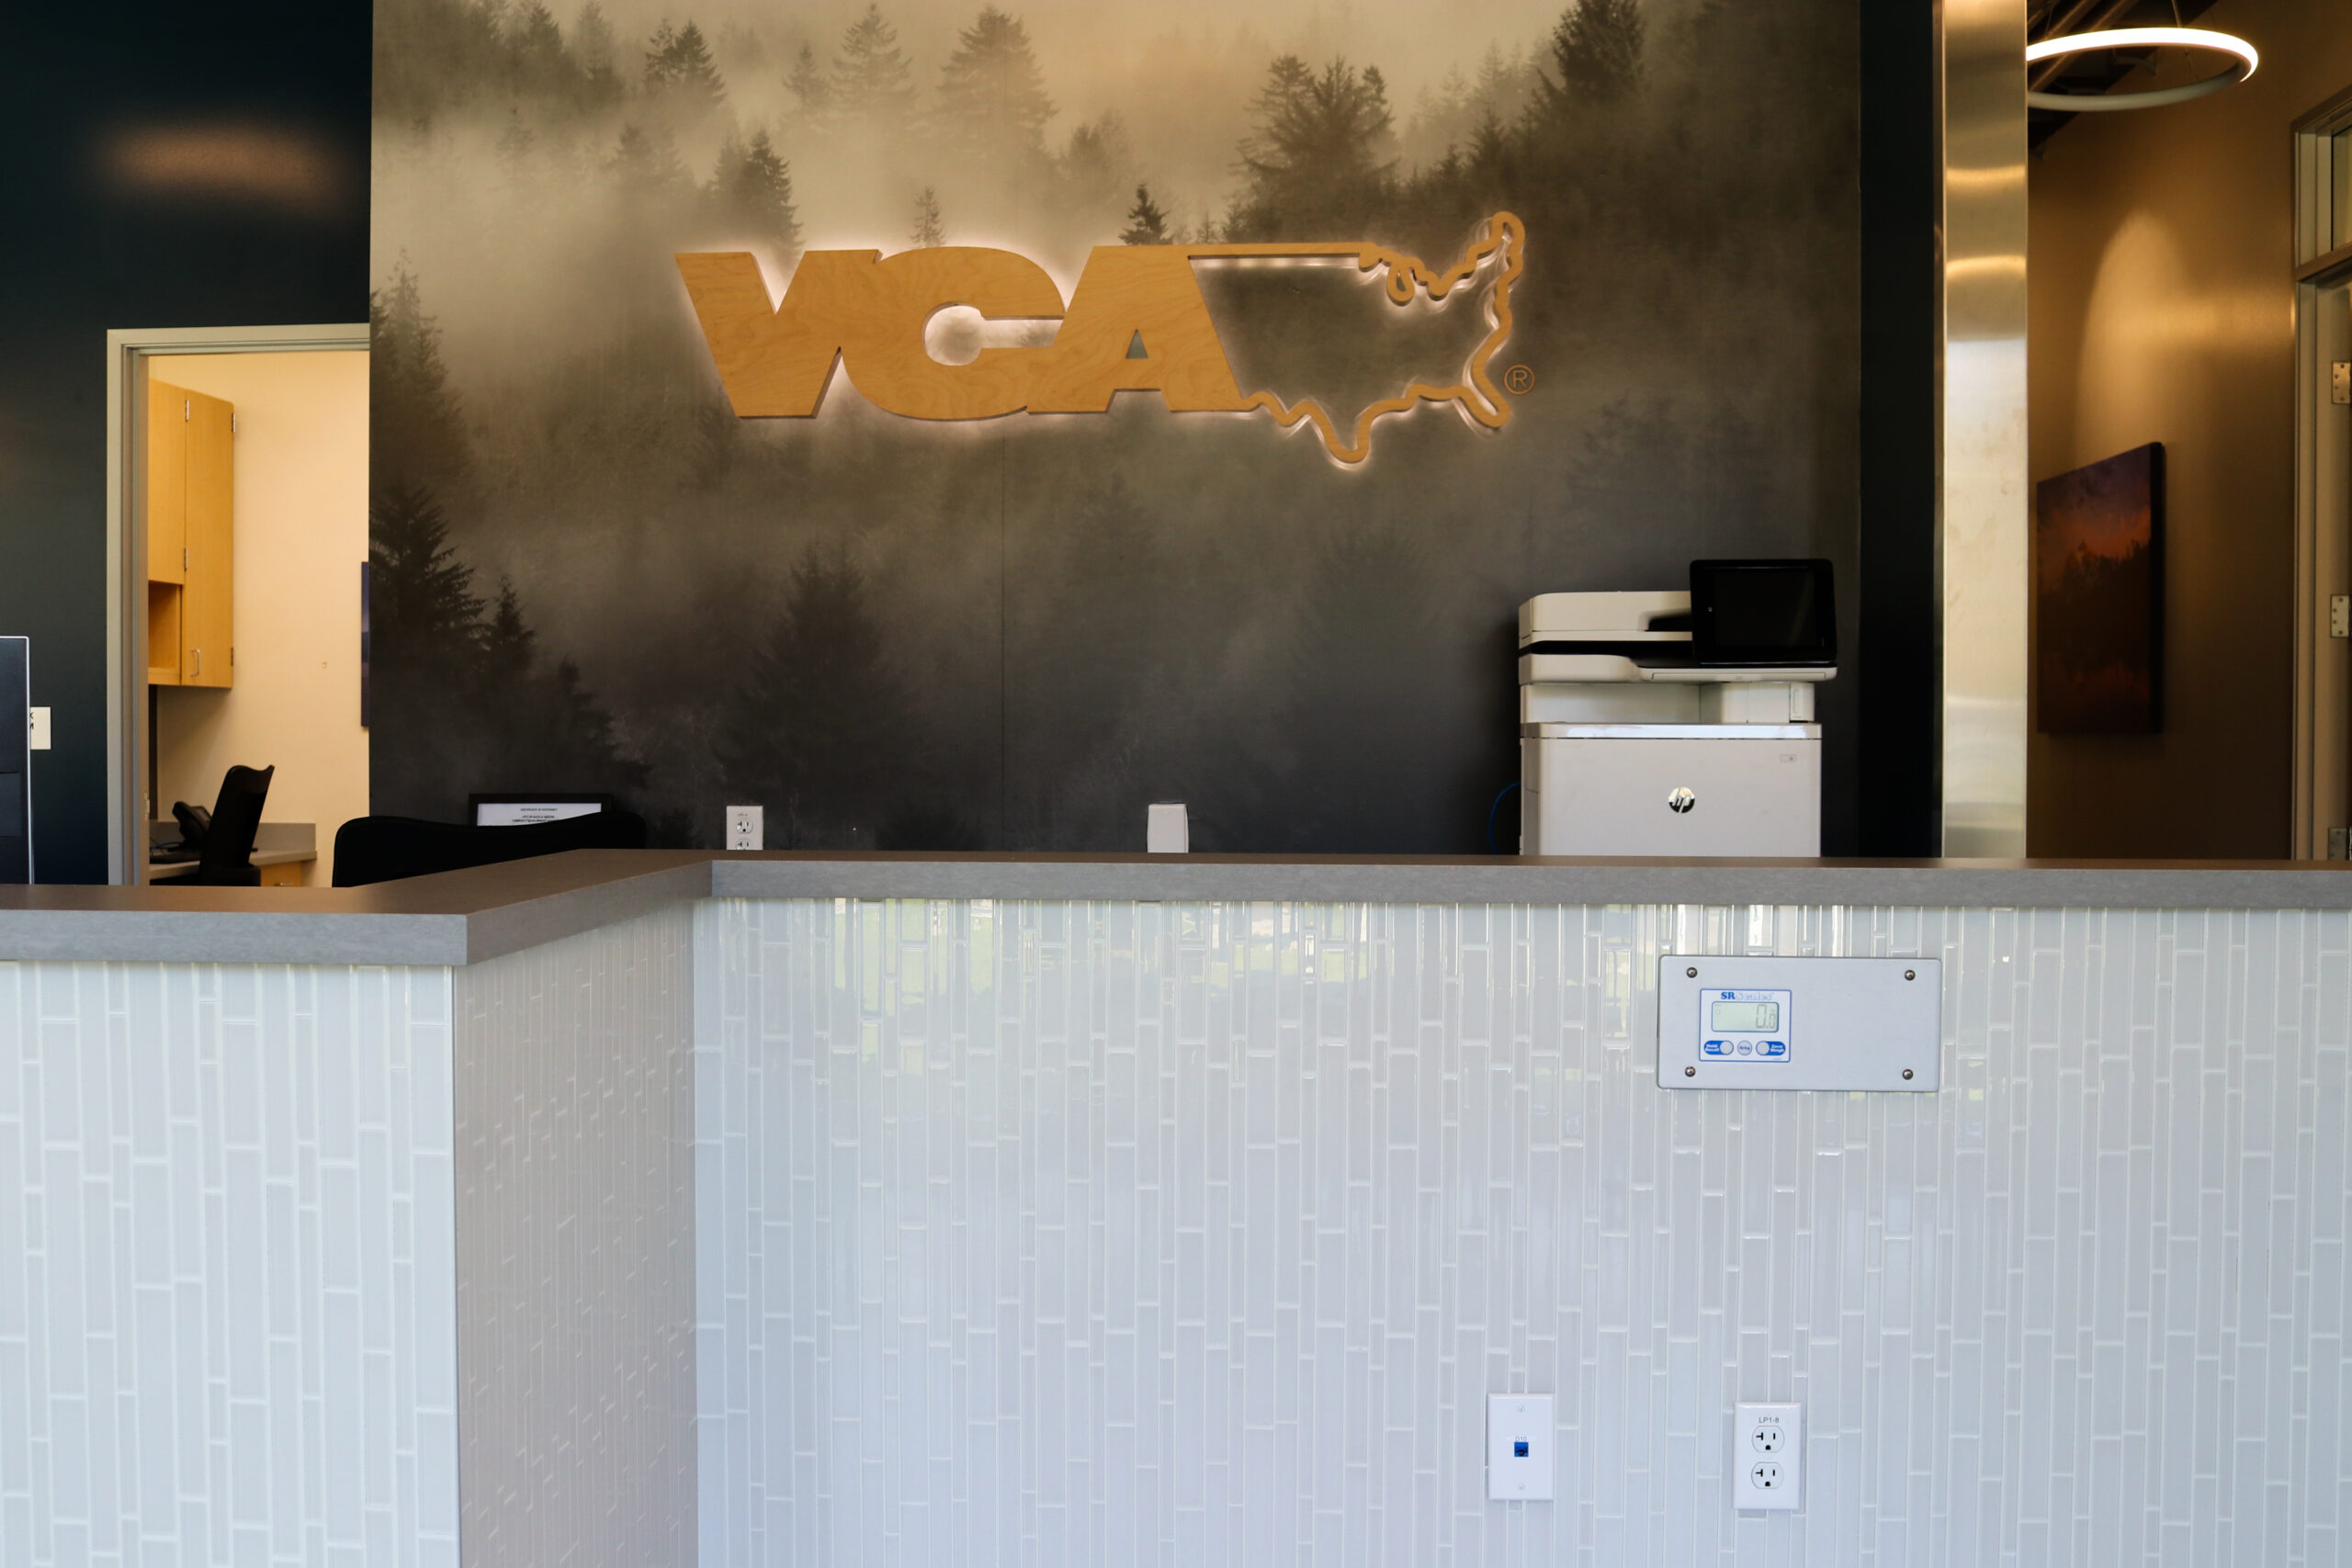 front desk wall signage of VCA animal hospital